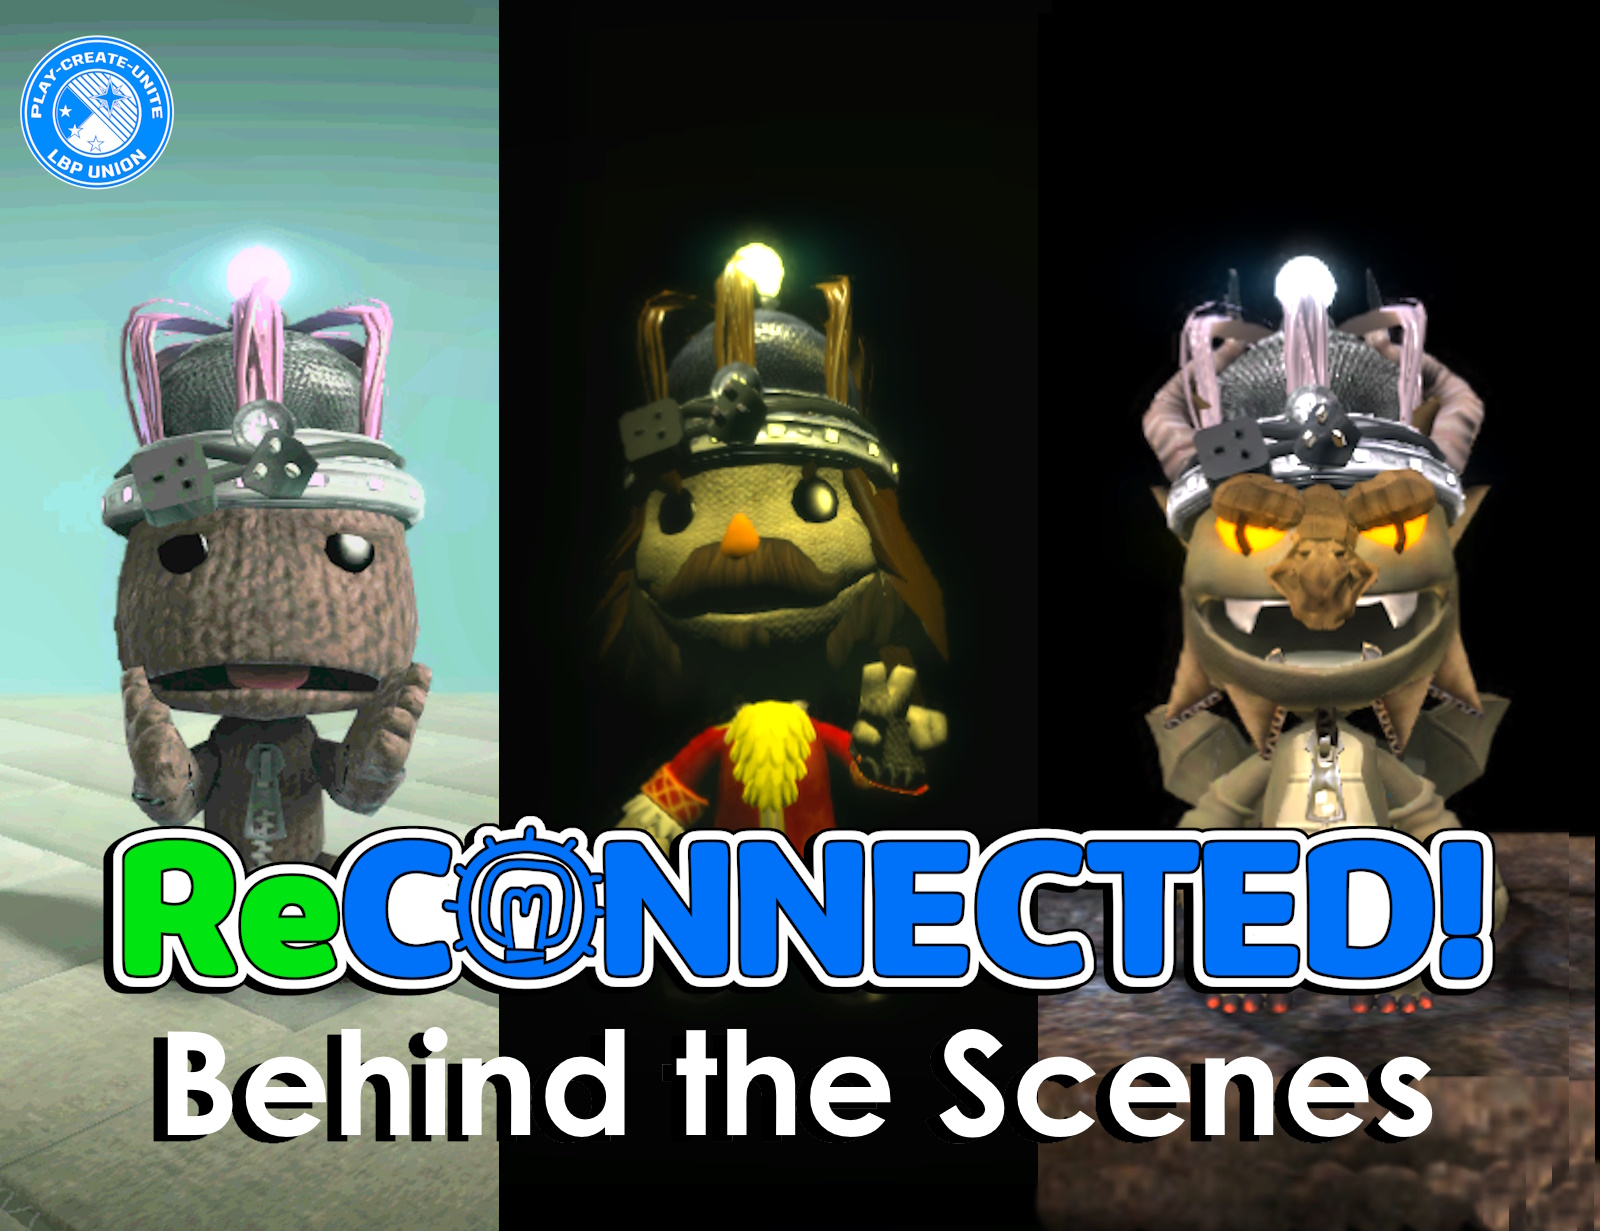 A lineup of the three winners of Reconnected 2. They are each wearing the Reconnected Crown.